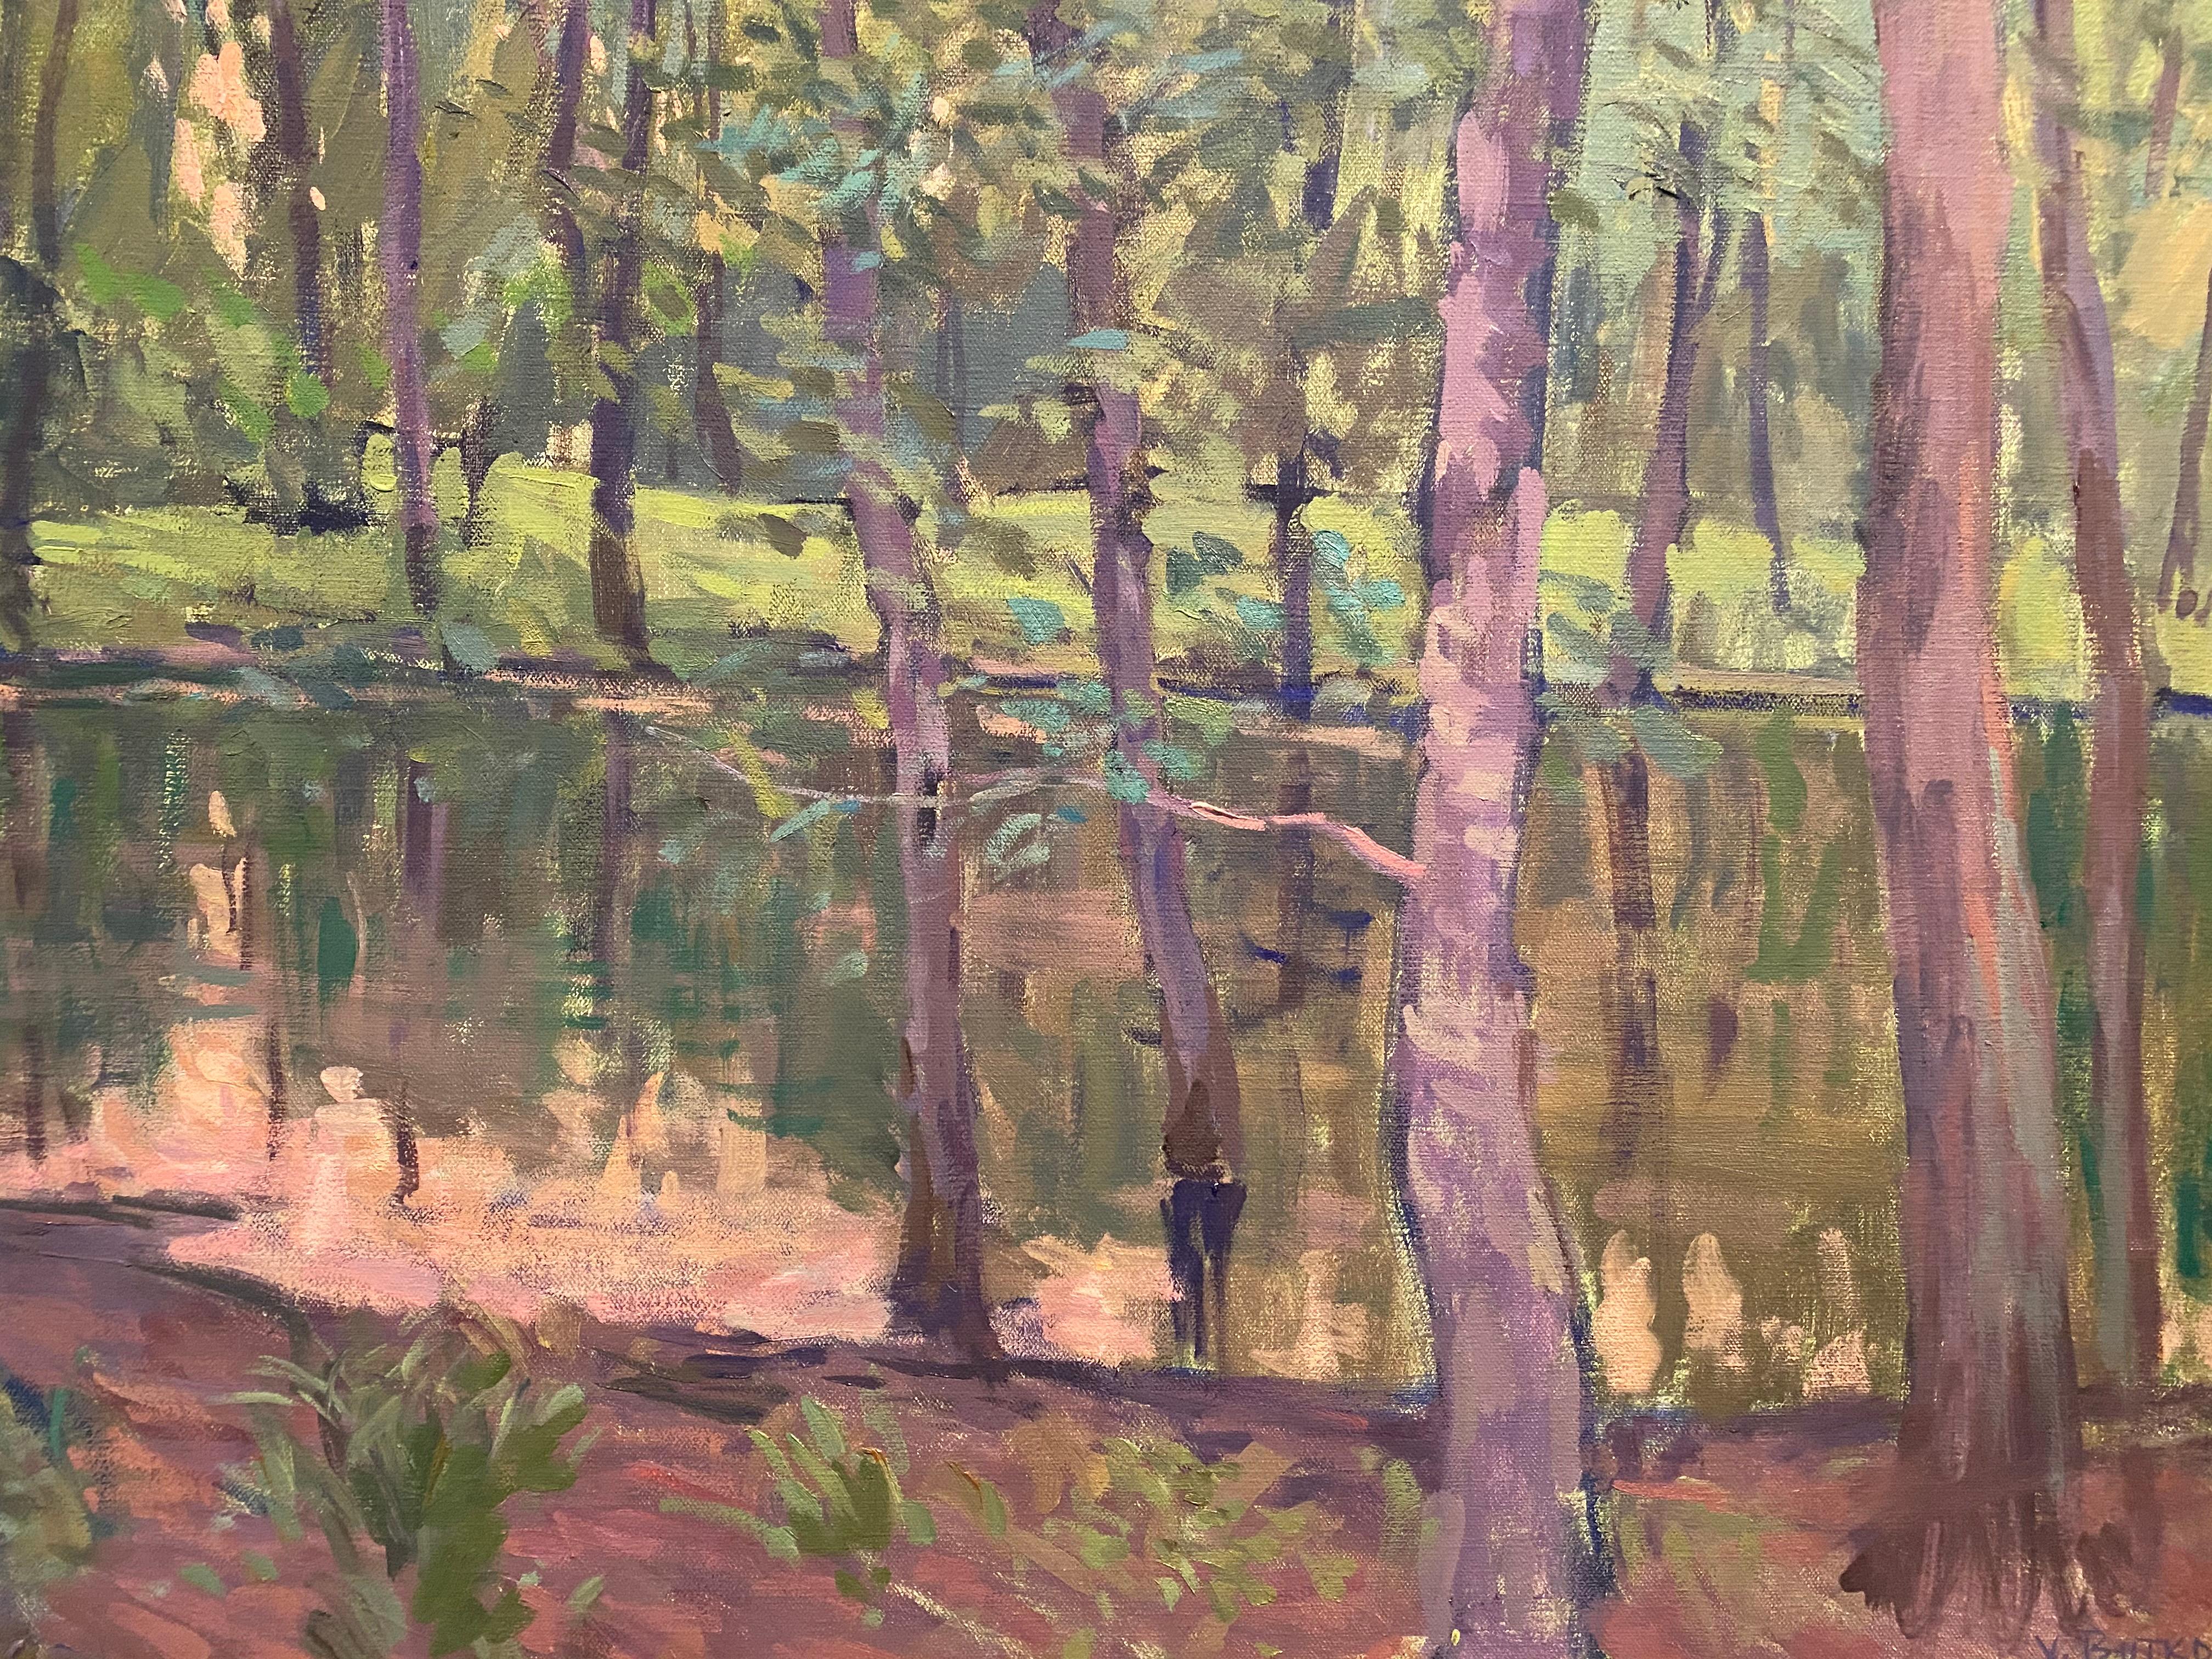 Oil on linen painting of a pond view in Shelter Island, at twilight. Butko paints this pond behind the house he stays in on shelter island often, at all different times of day and year. This particular scene, shows lush green trees and verdure